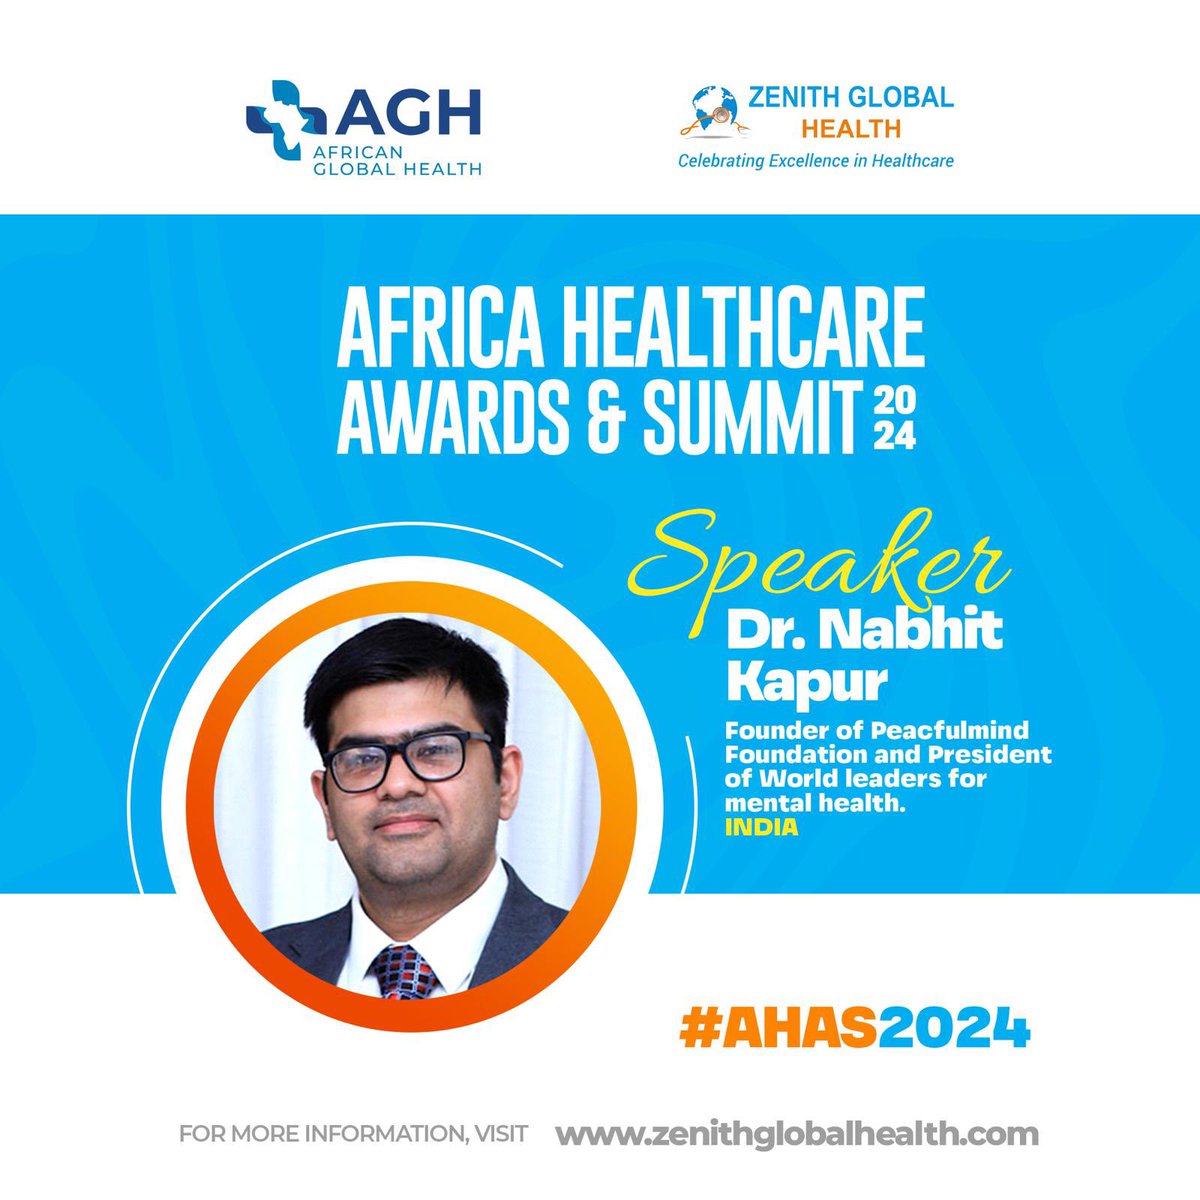 Looking forward to speaking at the African Healthcare Conference in Ghana 🇬🇭 this month. Stressing the focus on multilateral efforts to building a better and more encouraging sustainable healthcare system. #Mentalhealth being the crucial element in development of youth and health…